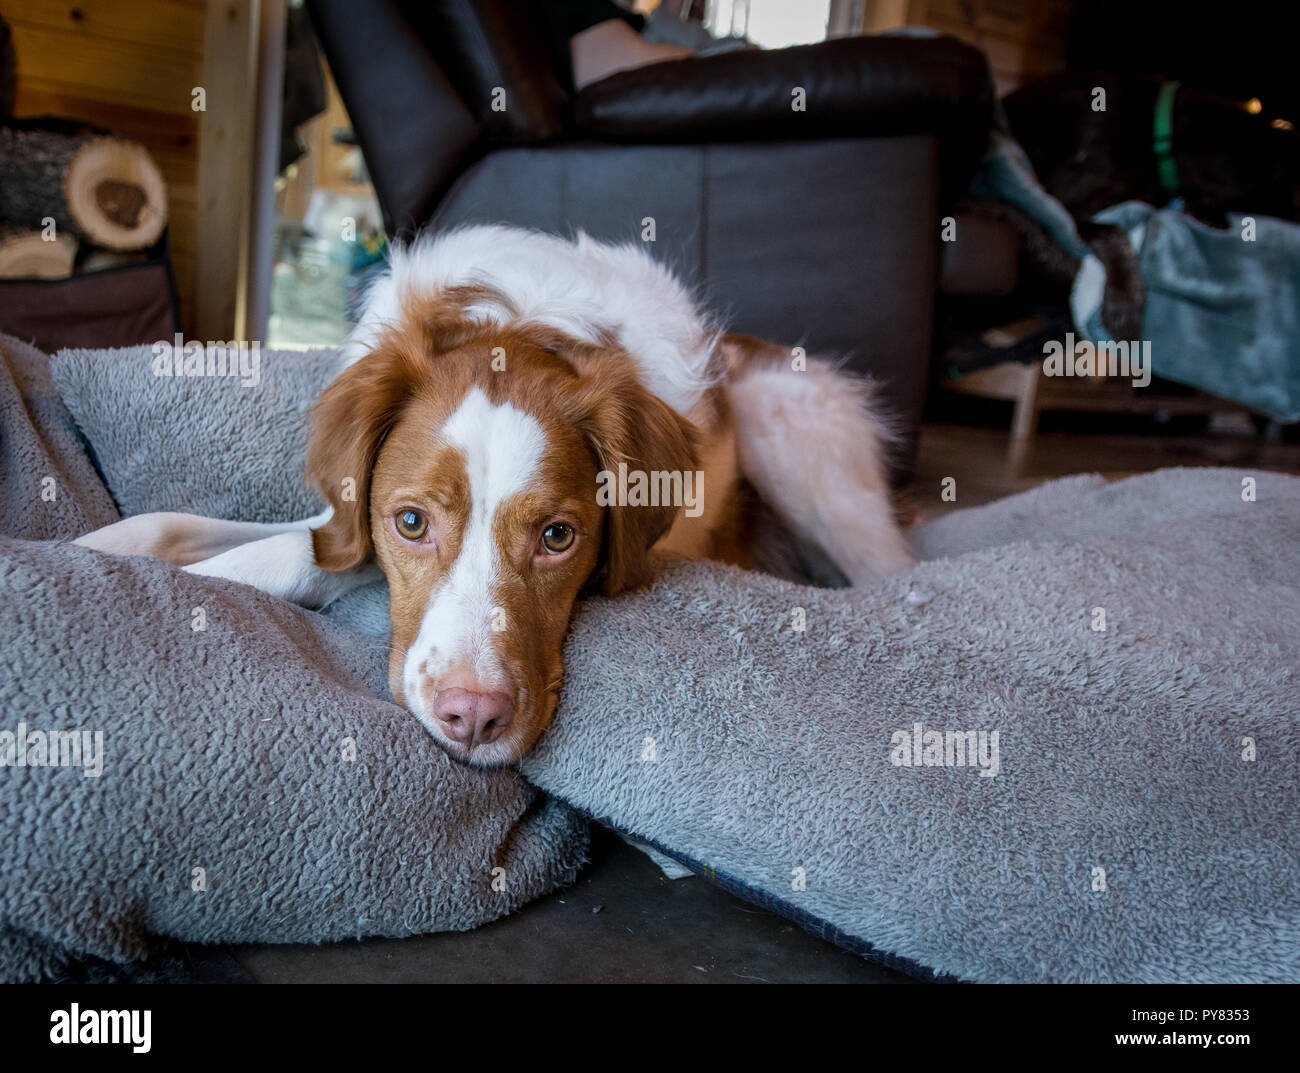 Brittany realzed on bunhc of dog pillow in cabin Stock Photo